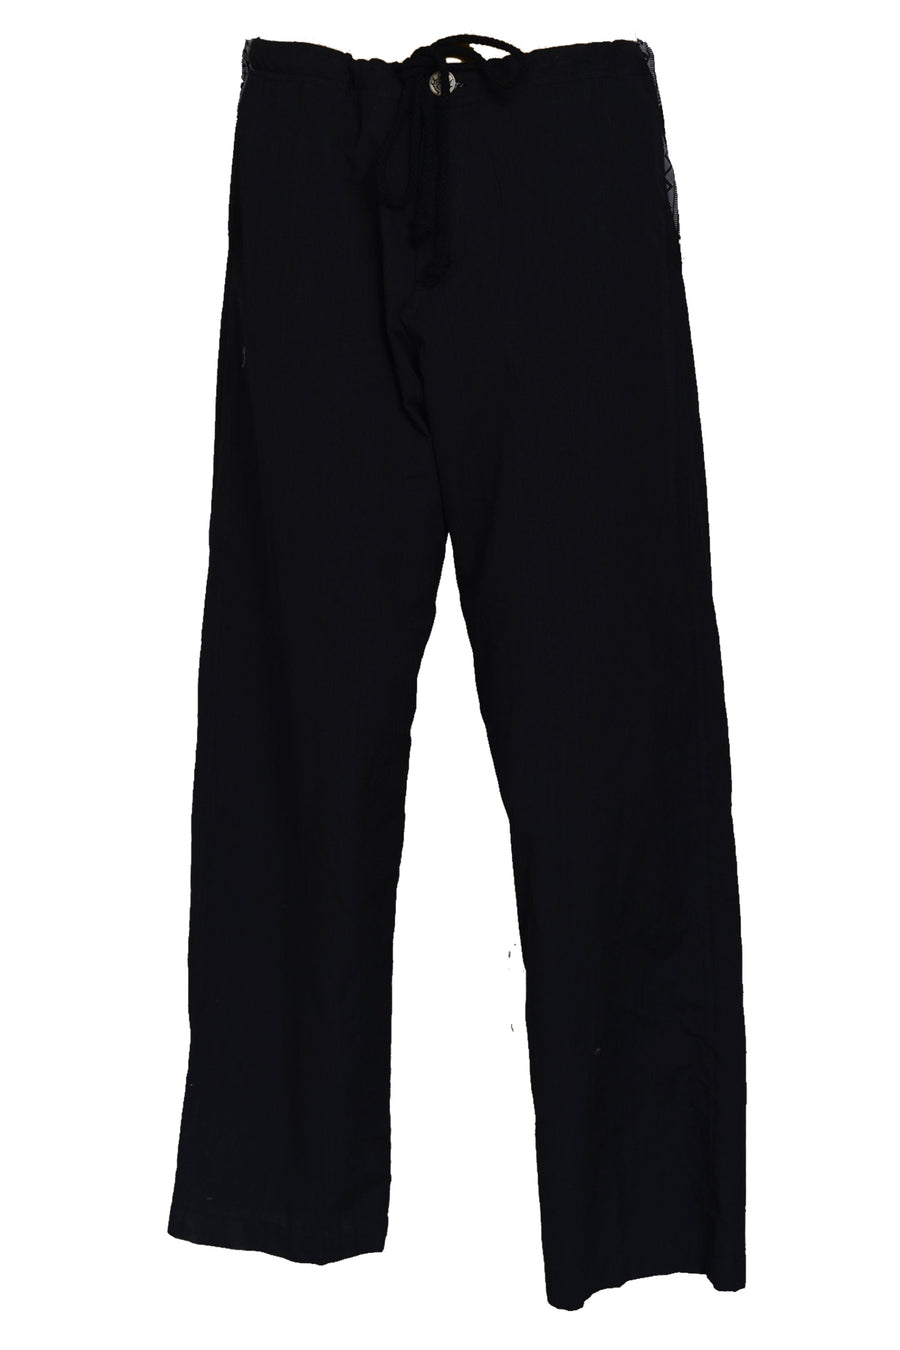 Hese - Soft Cotton With Border Drawstring Pants (4493575192681)